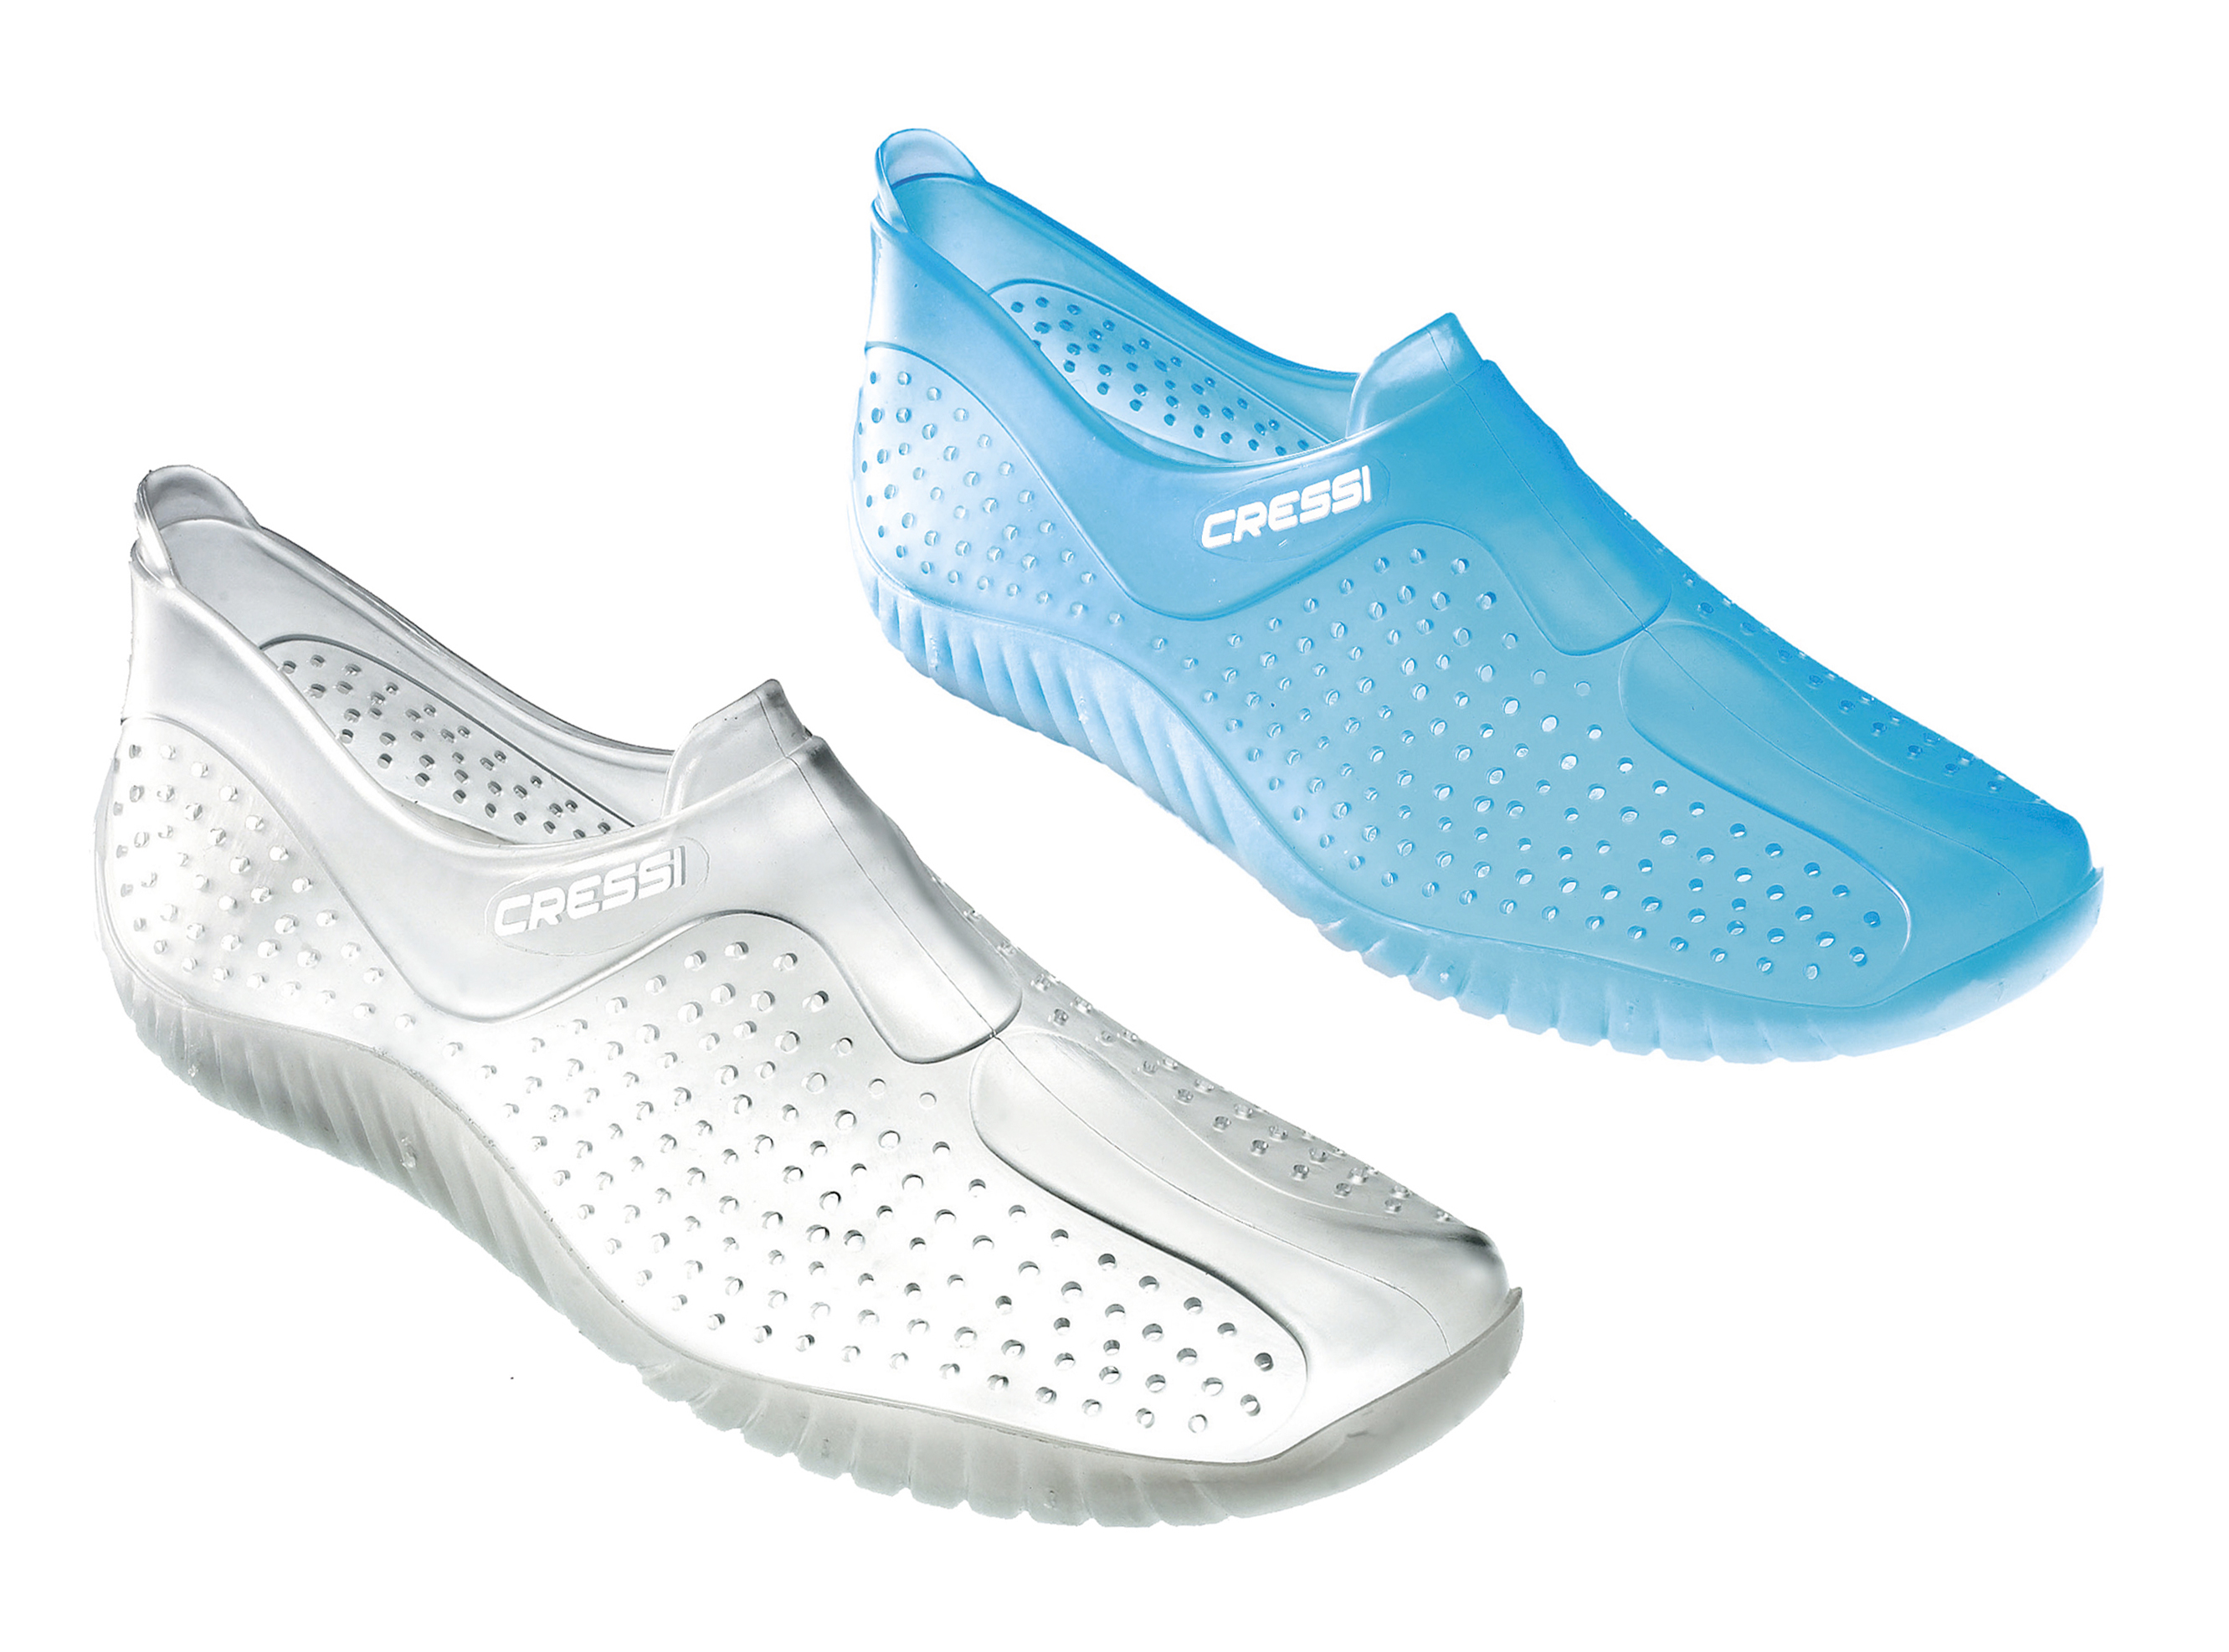 CRESSI Non-slip slippers for pool, beach and boats | CRESSI - Picture 1 of 1